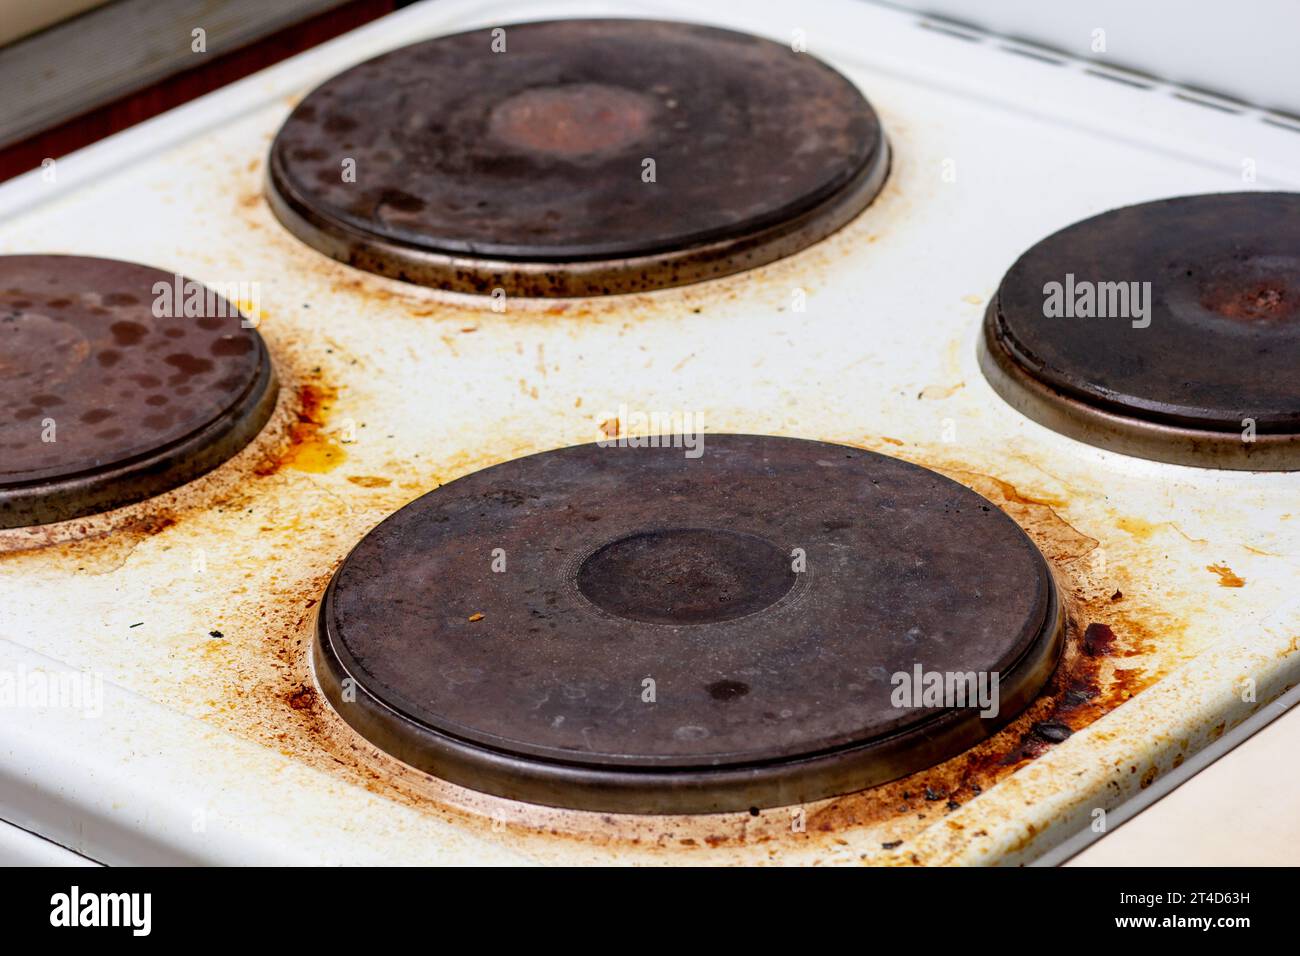 Dirty white electric stove with fat on surface Stock Photo